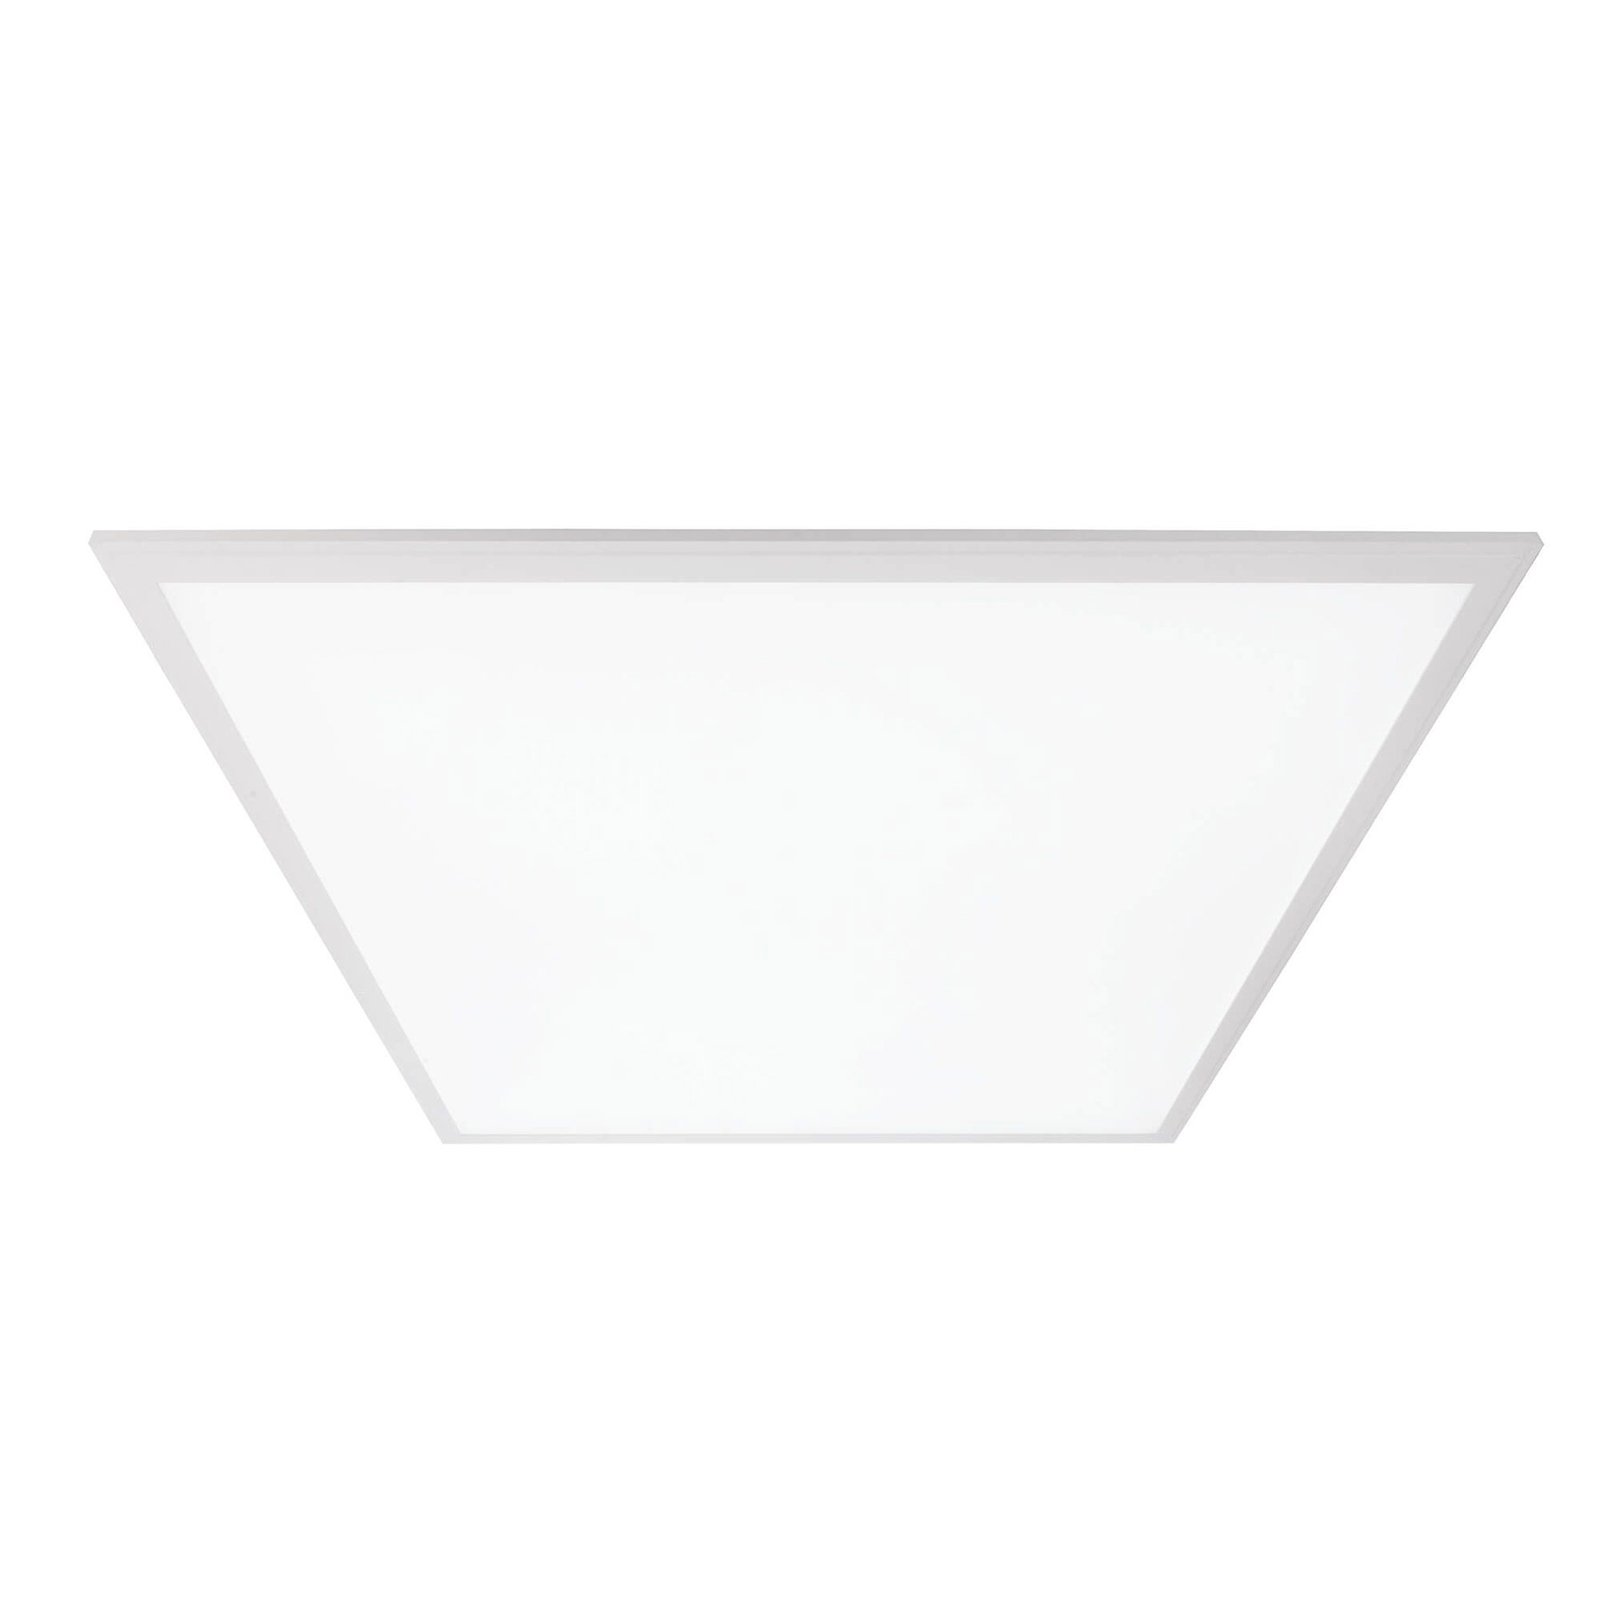 Luminaire à trame LED 100032, dimmable 3000-5500K